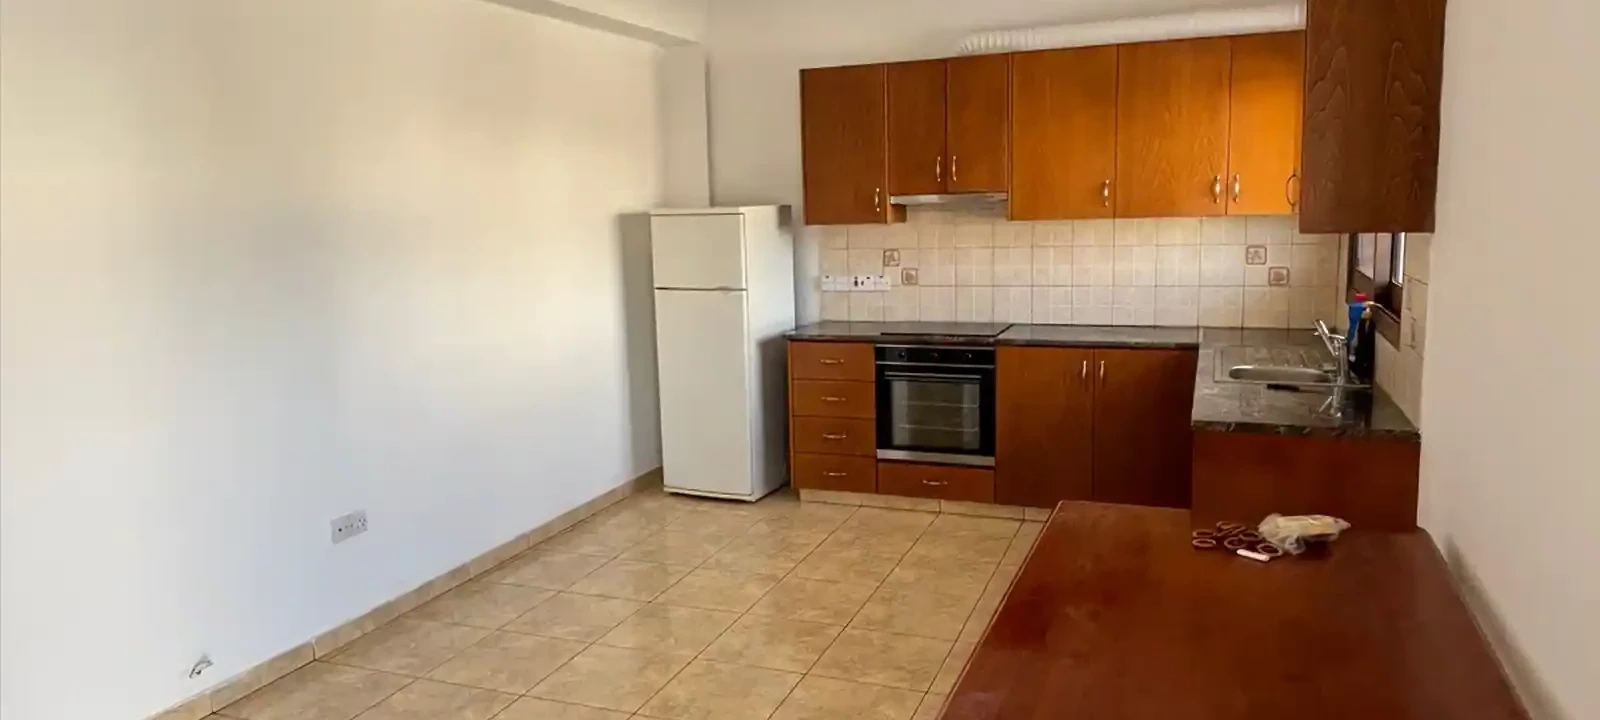 3-bedroom apartment to rent €1.150, image 1